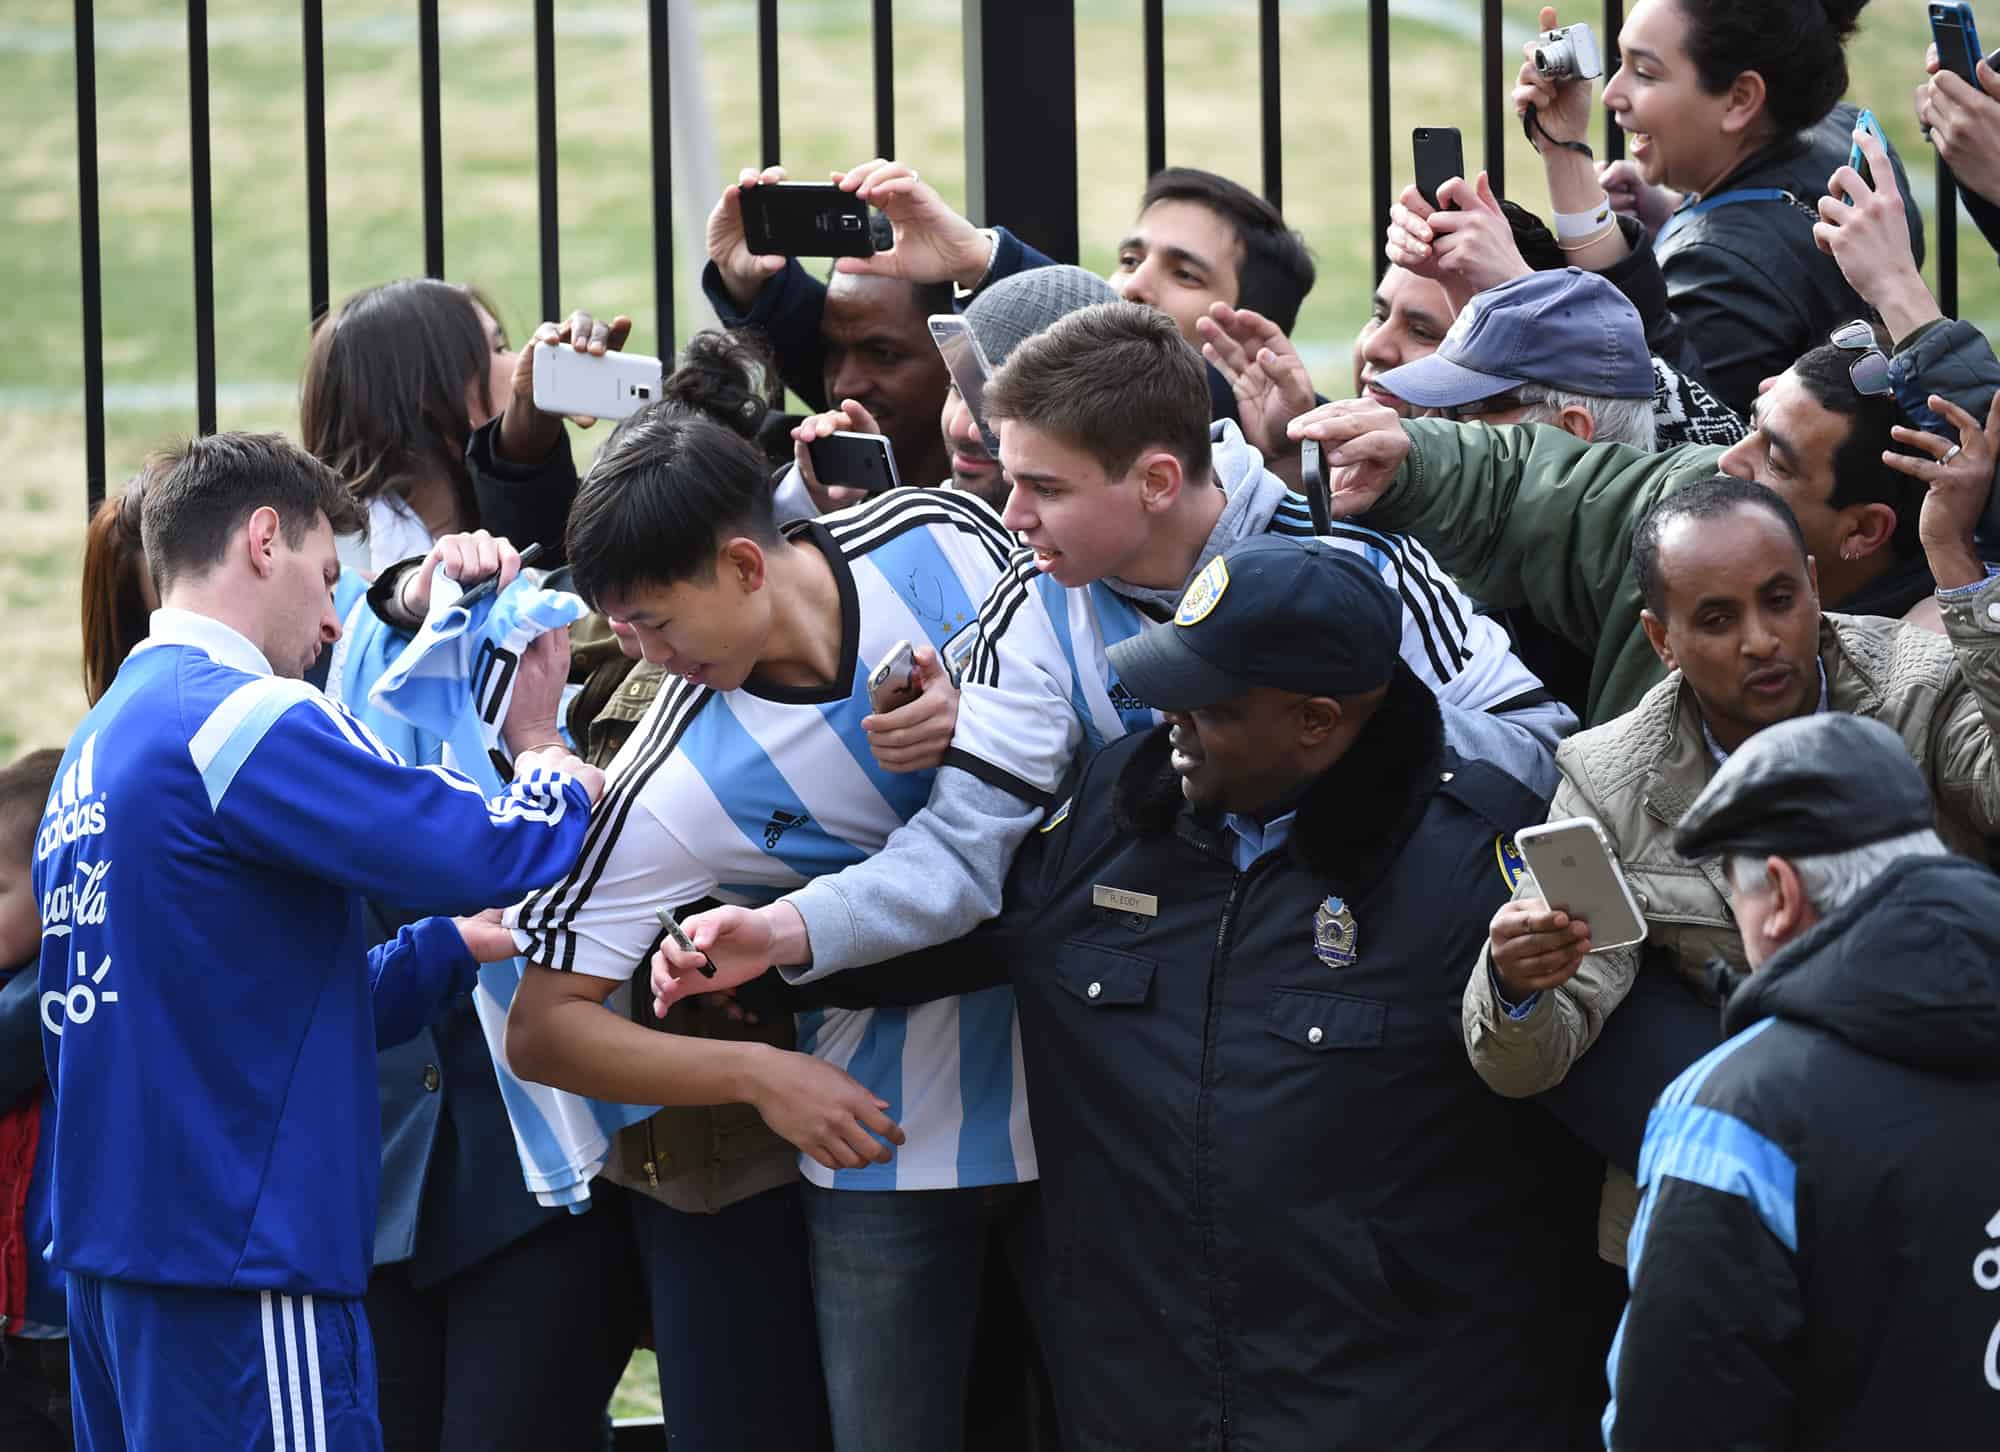 Lionel Messi, left, signs autographs for some of the hundreds of fans who showed up for a glimpse of the Argentine national team's practice at Georgetown University in Washington, March 24, 2015.